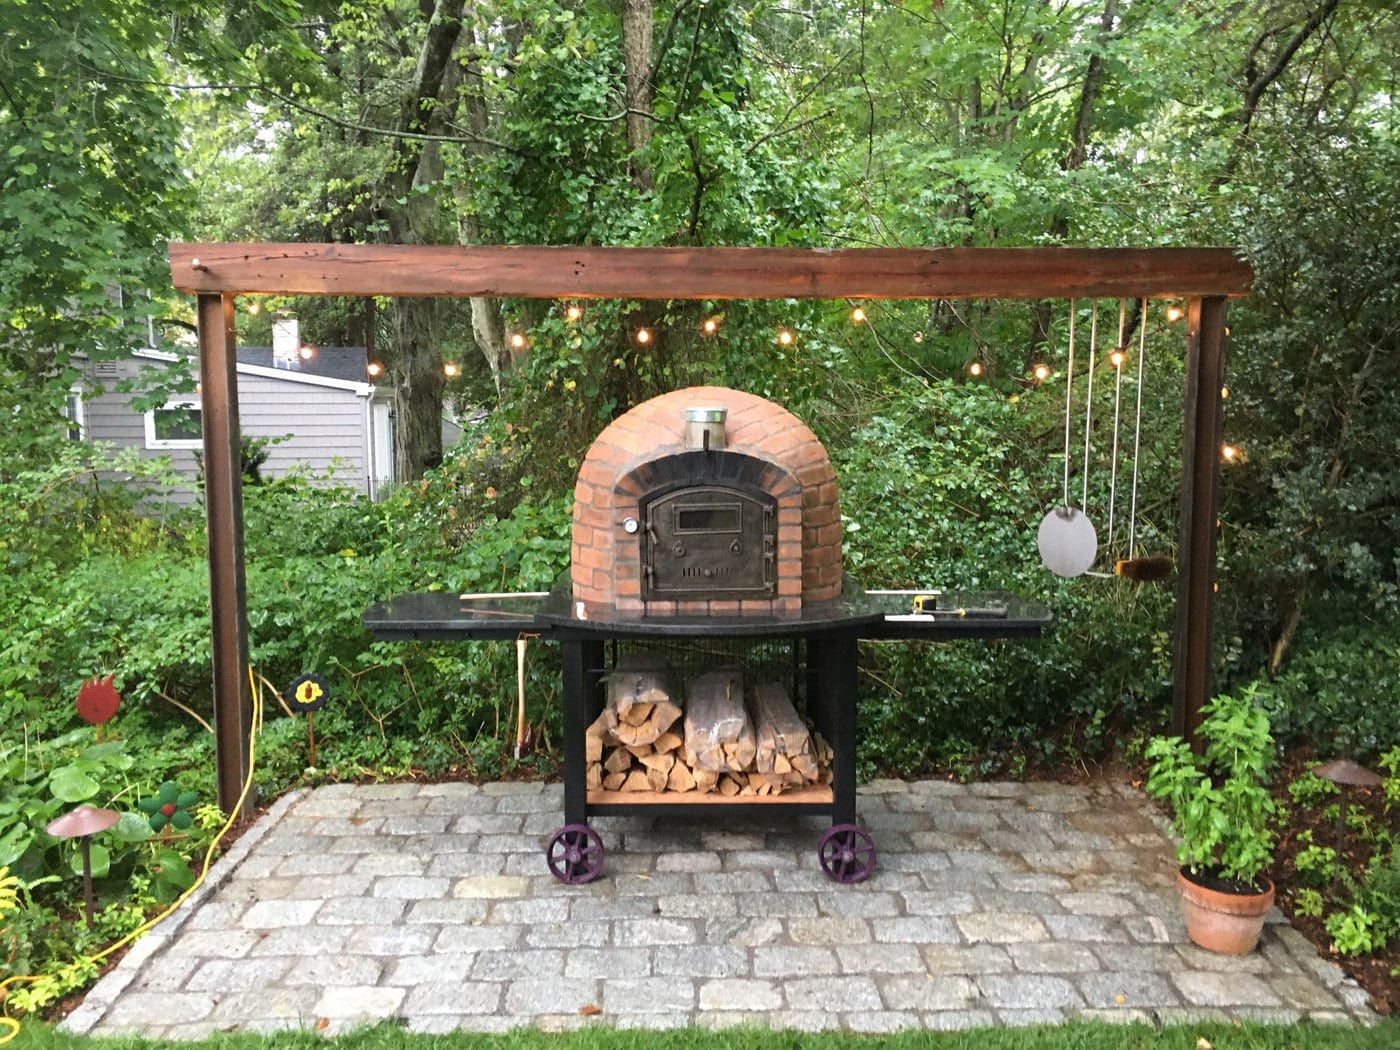 Buy an artisan clay pizza oven - Shop our wood-fired ovens - Fuego